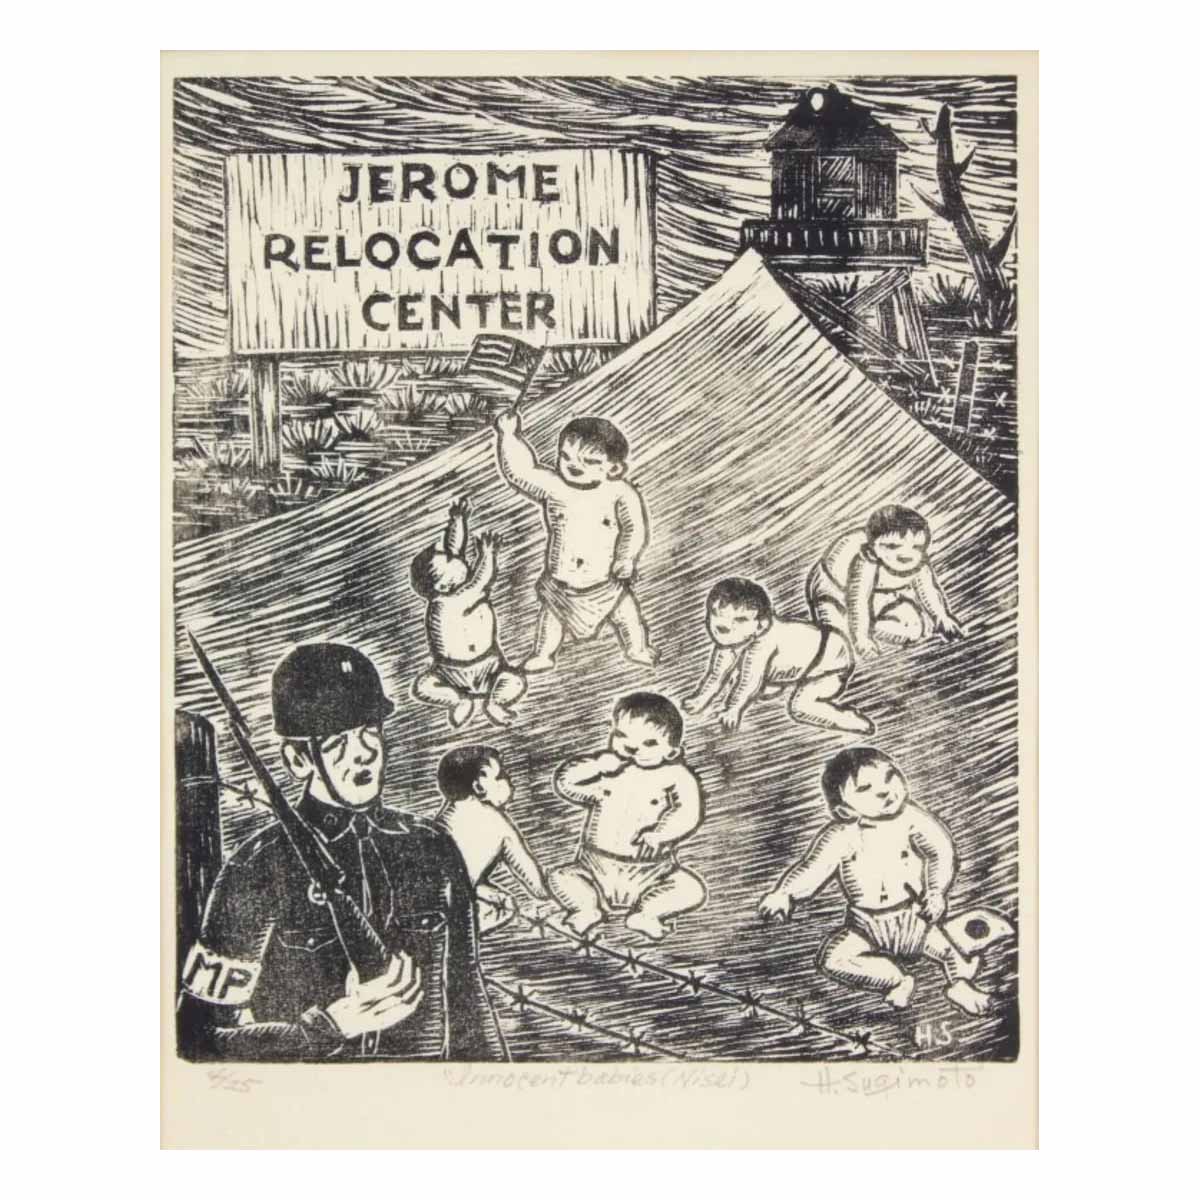 Six Henry Sugimoto internment-inspired woodblock prints exceeded expectations at District Auction